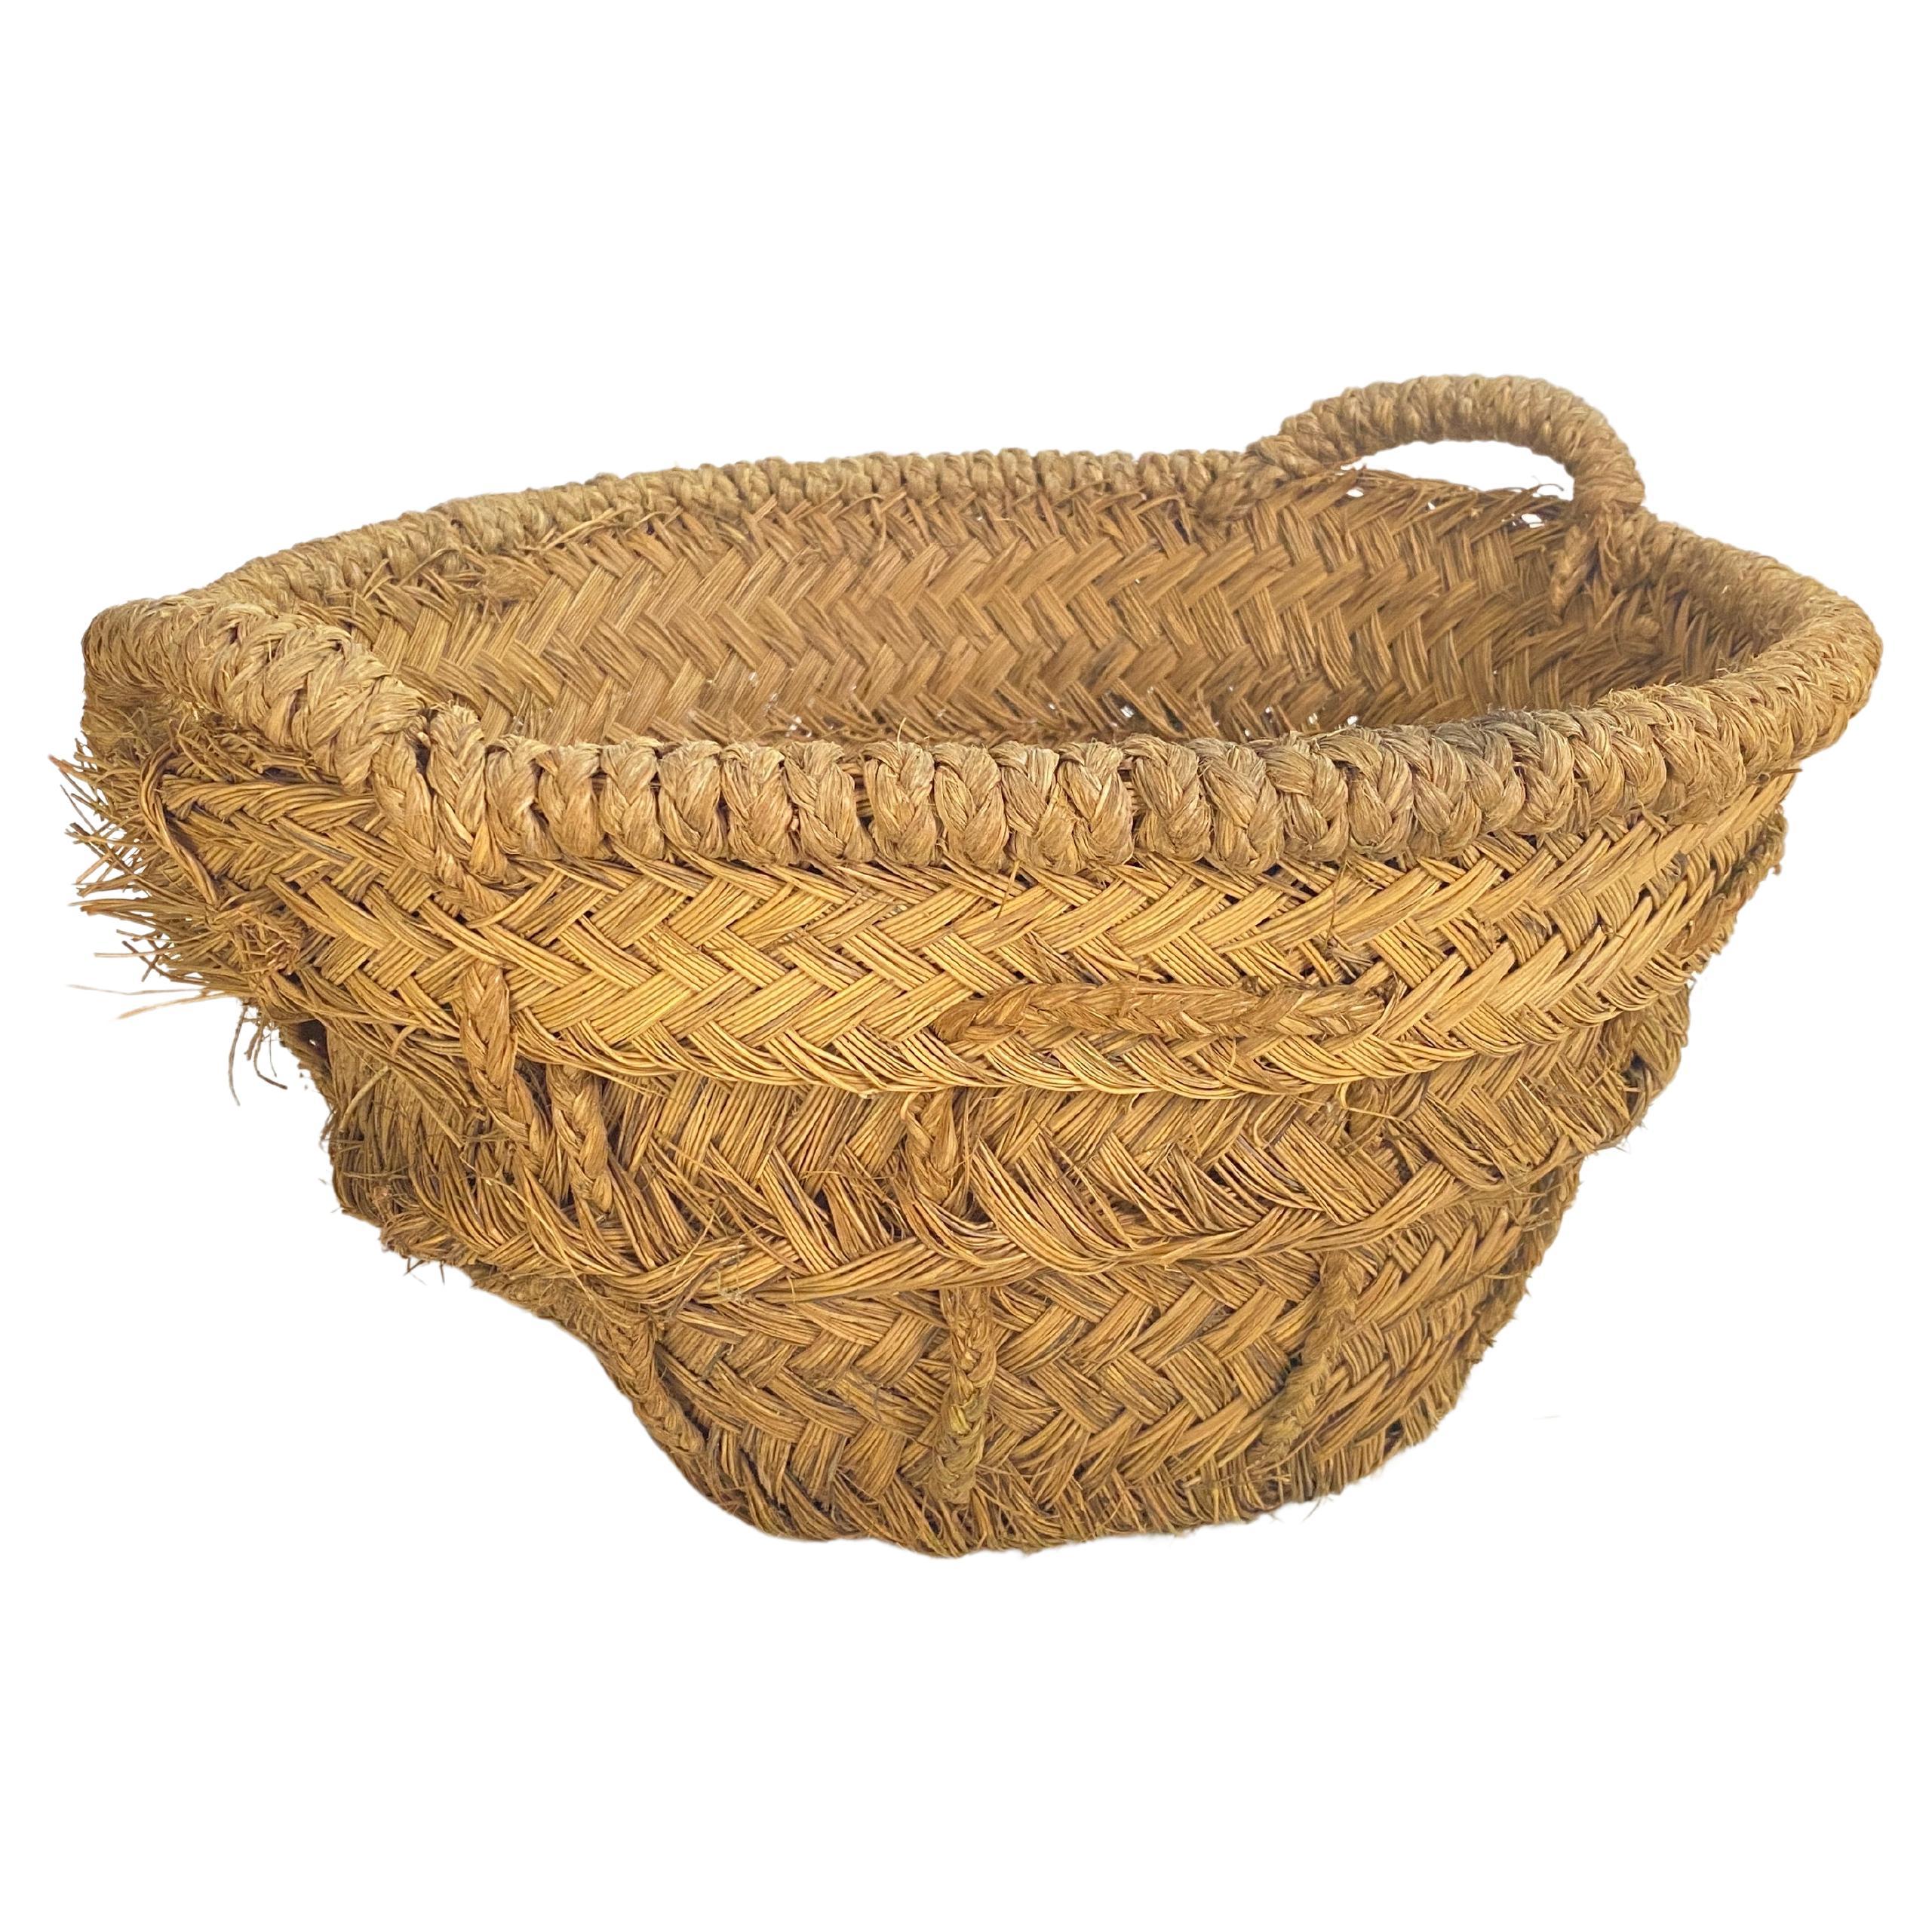  Basket in Rattan Rond Form Italy, Brown Color 1970 For Sale